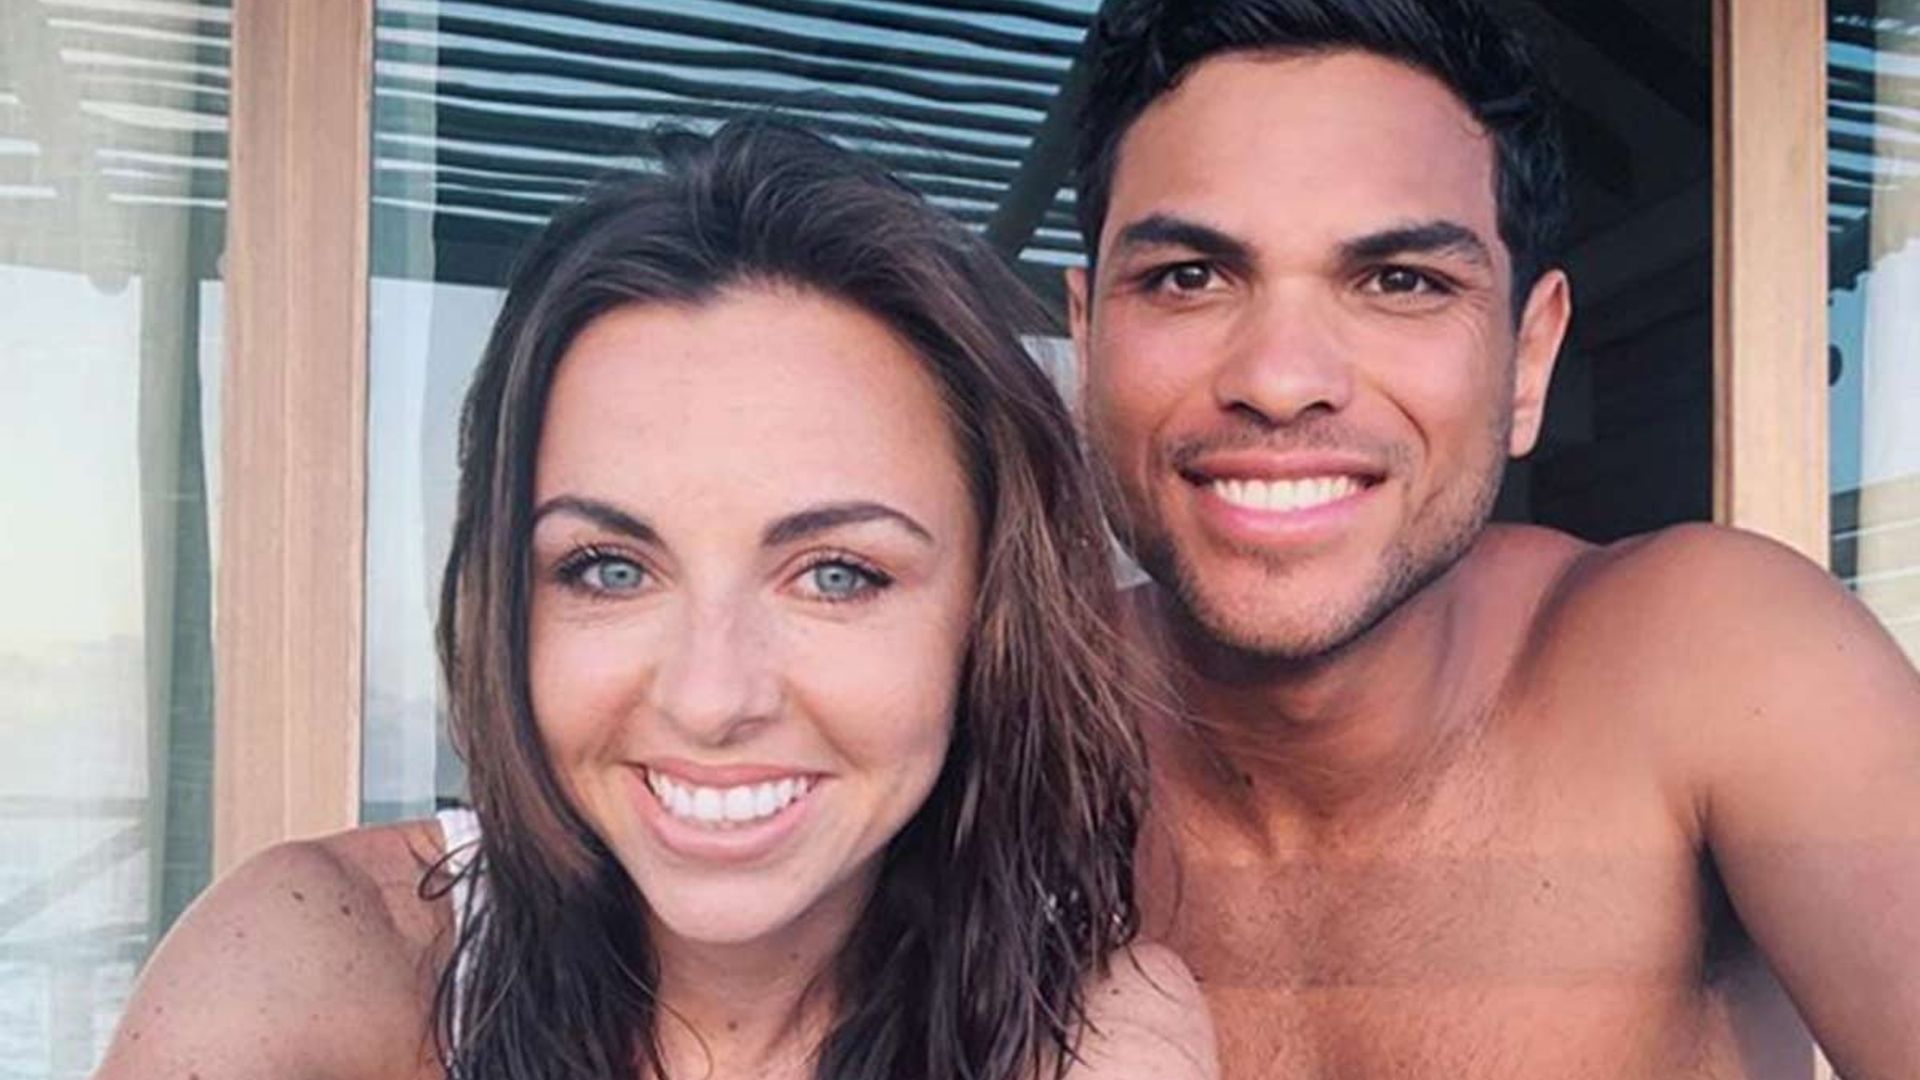 EastEnders actress Louisa Lytton celebrates at engagement party after romantic Maldives proposal